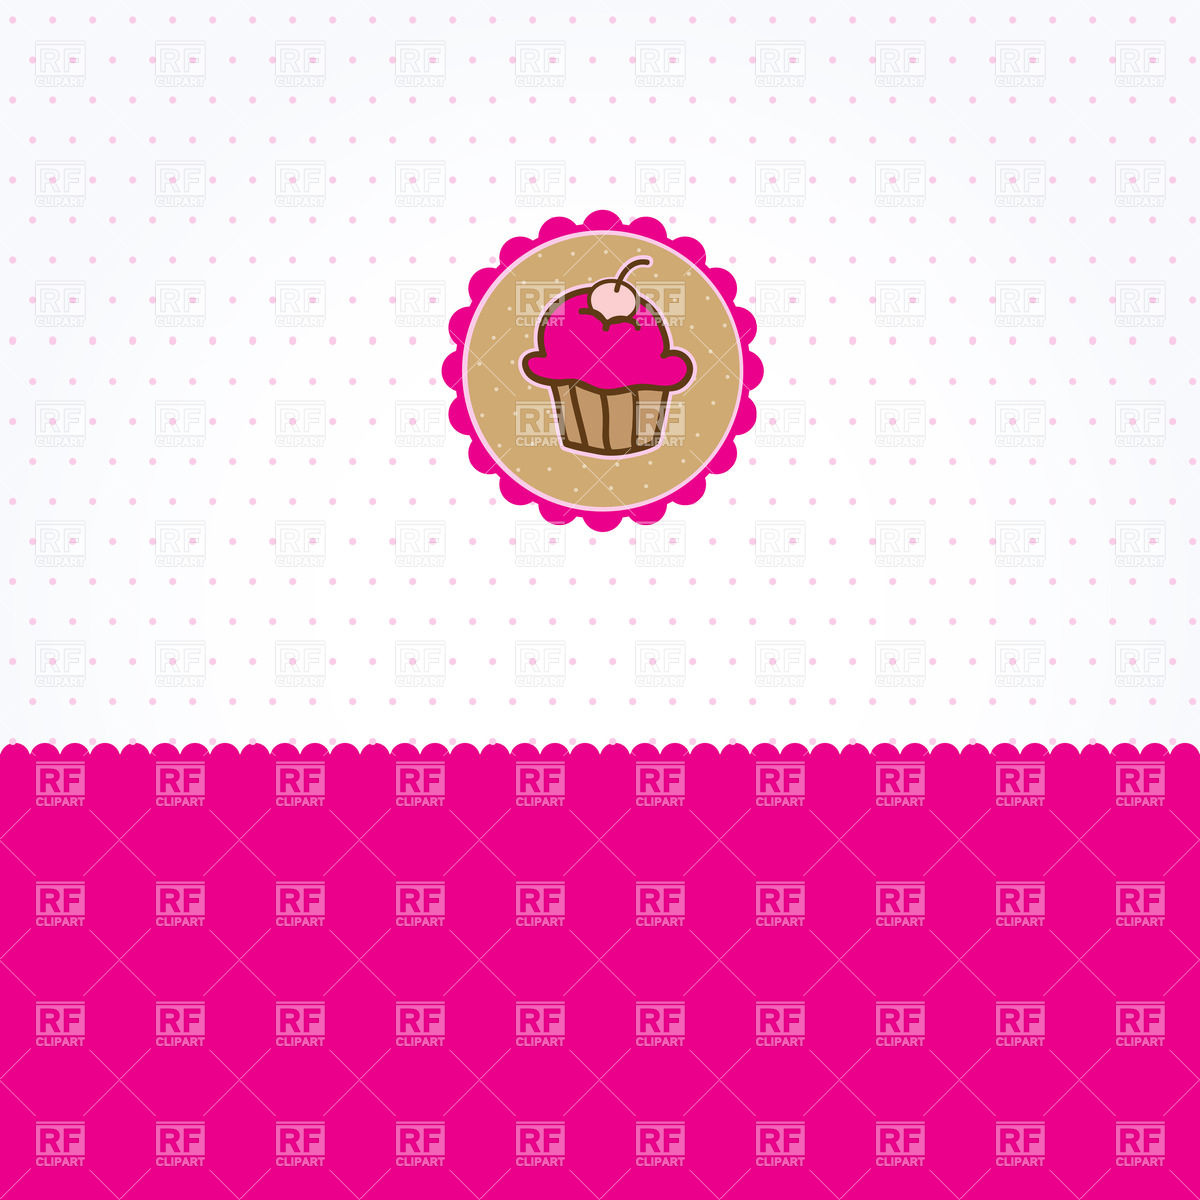 Small Pink Cupcake Over Polka Dot Background And Place For